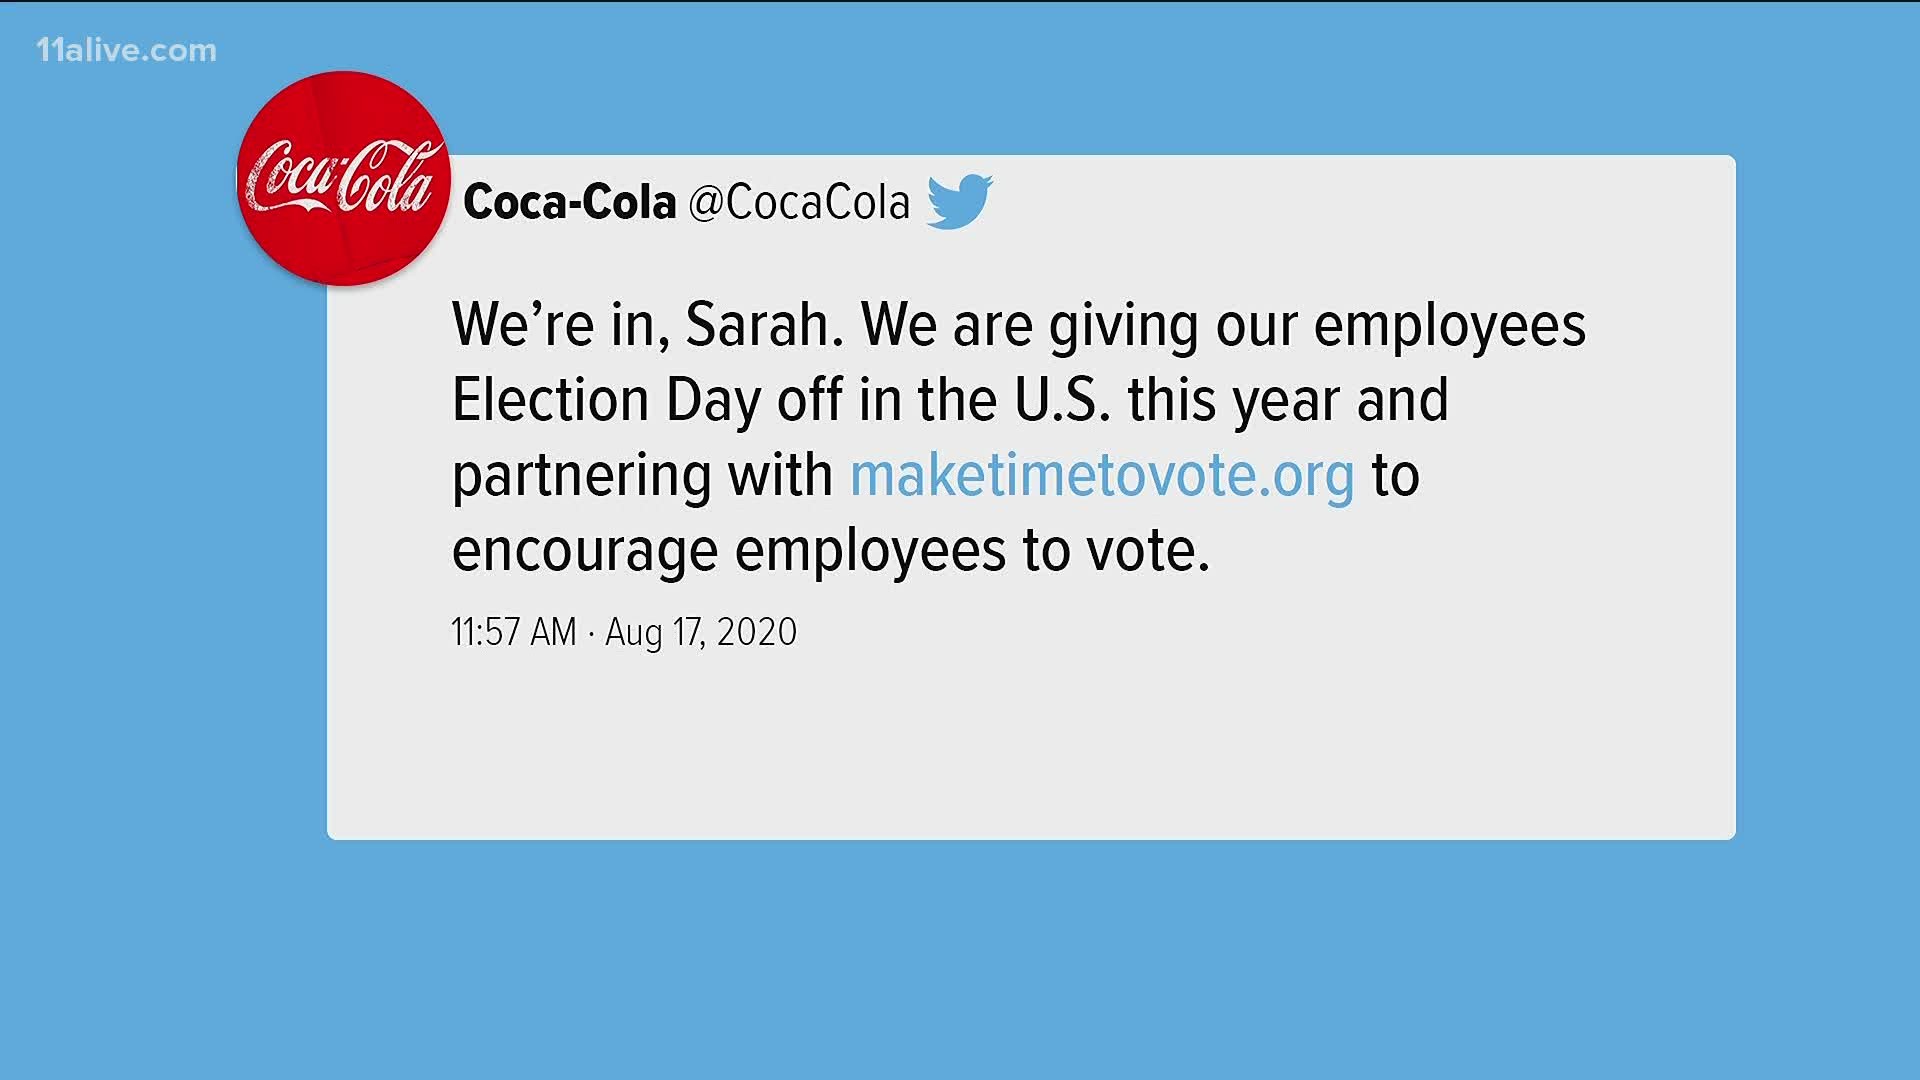 The company responded to a tweet by comedian Sarah Silverman challenging companies to give employees Election Day off to vote.